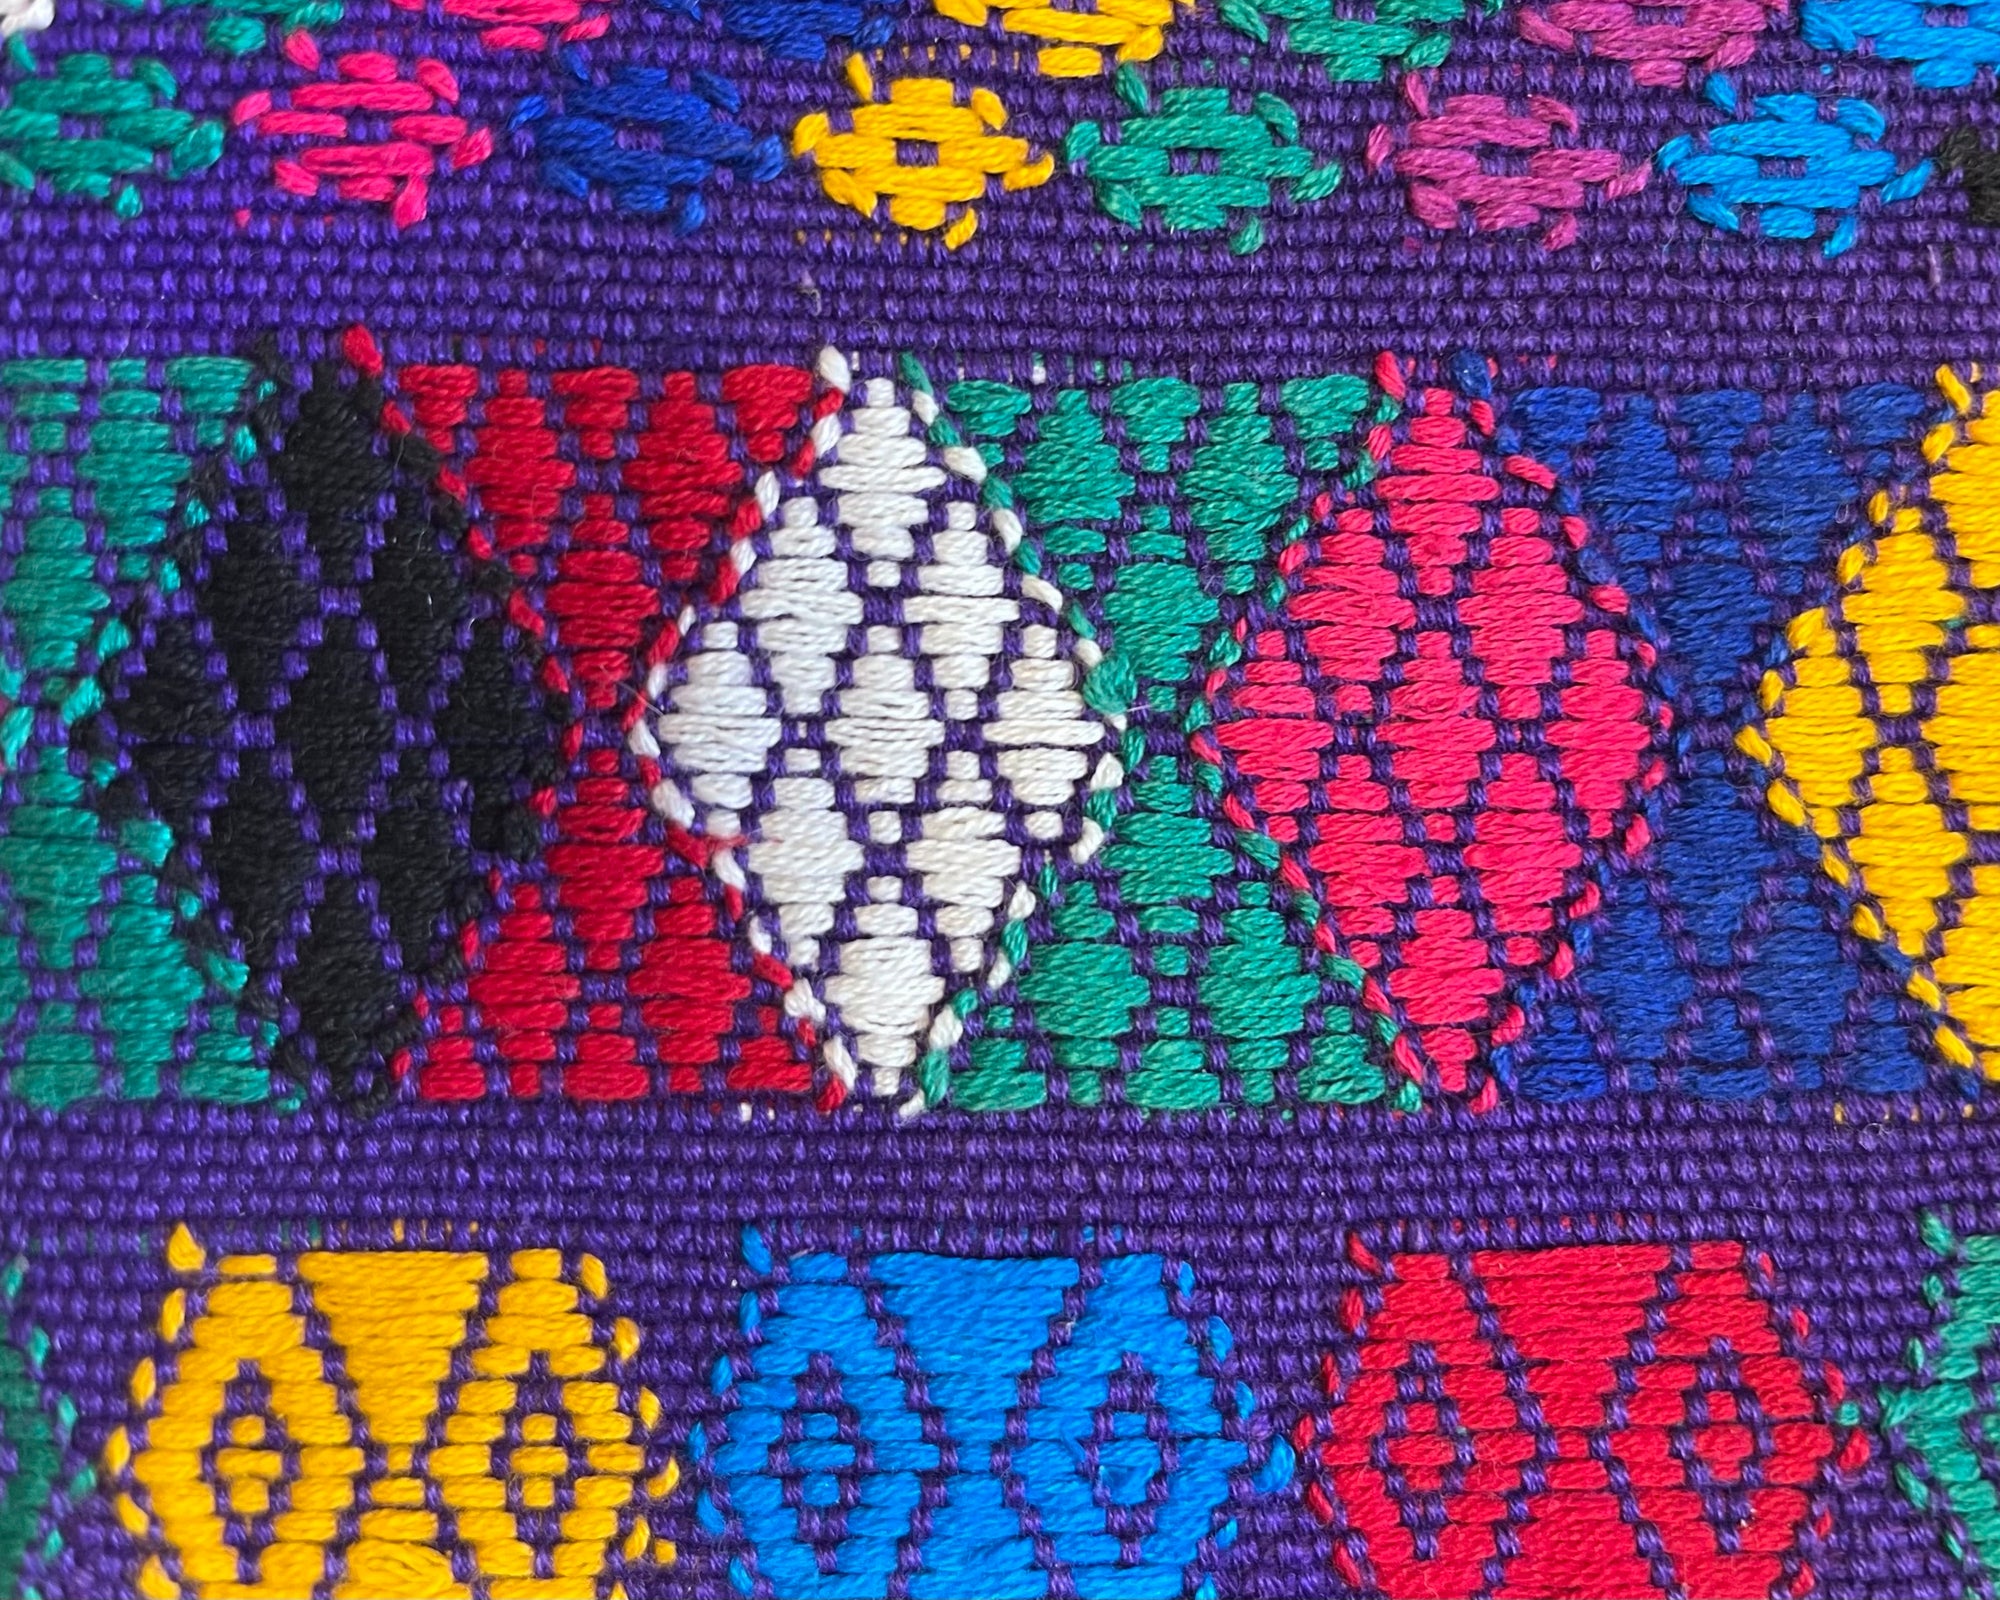 Weaving, Culture, and Tradition in Guatemala